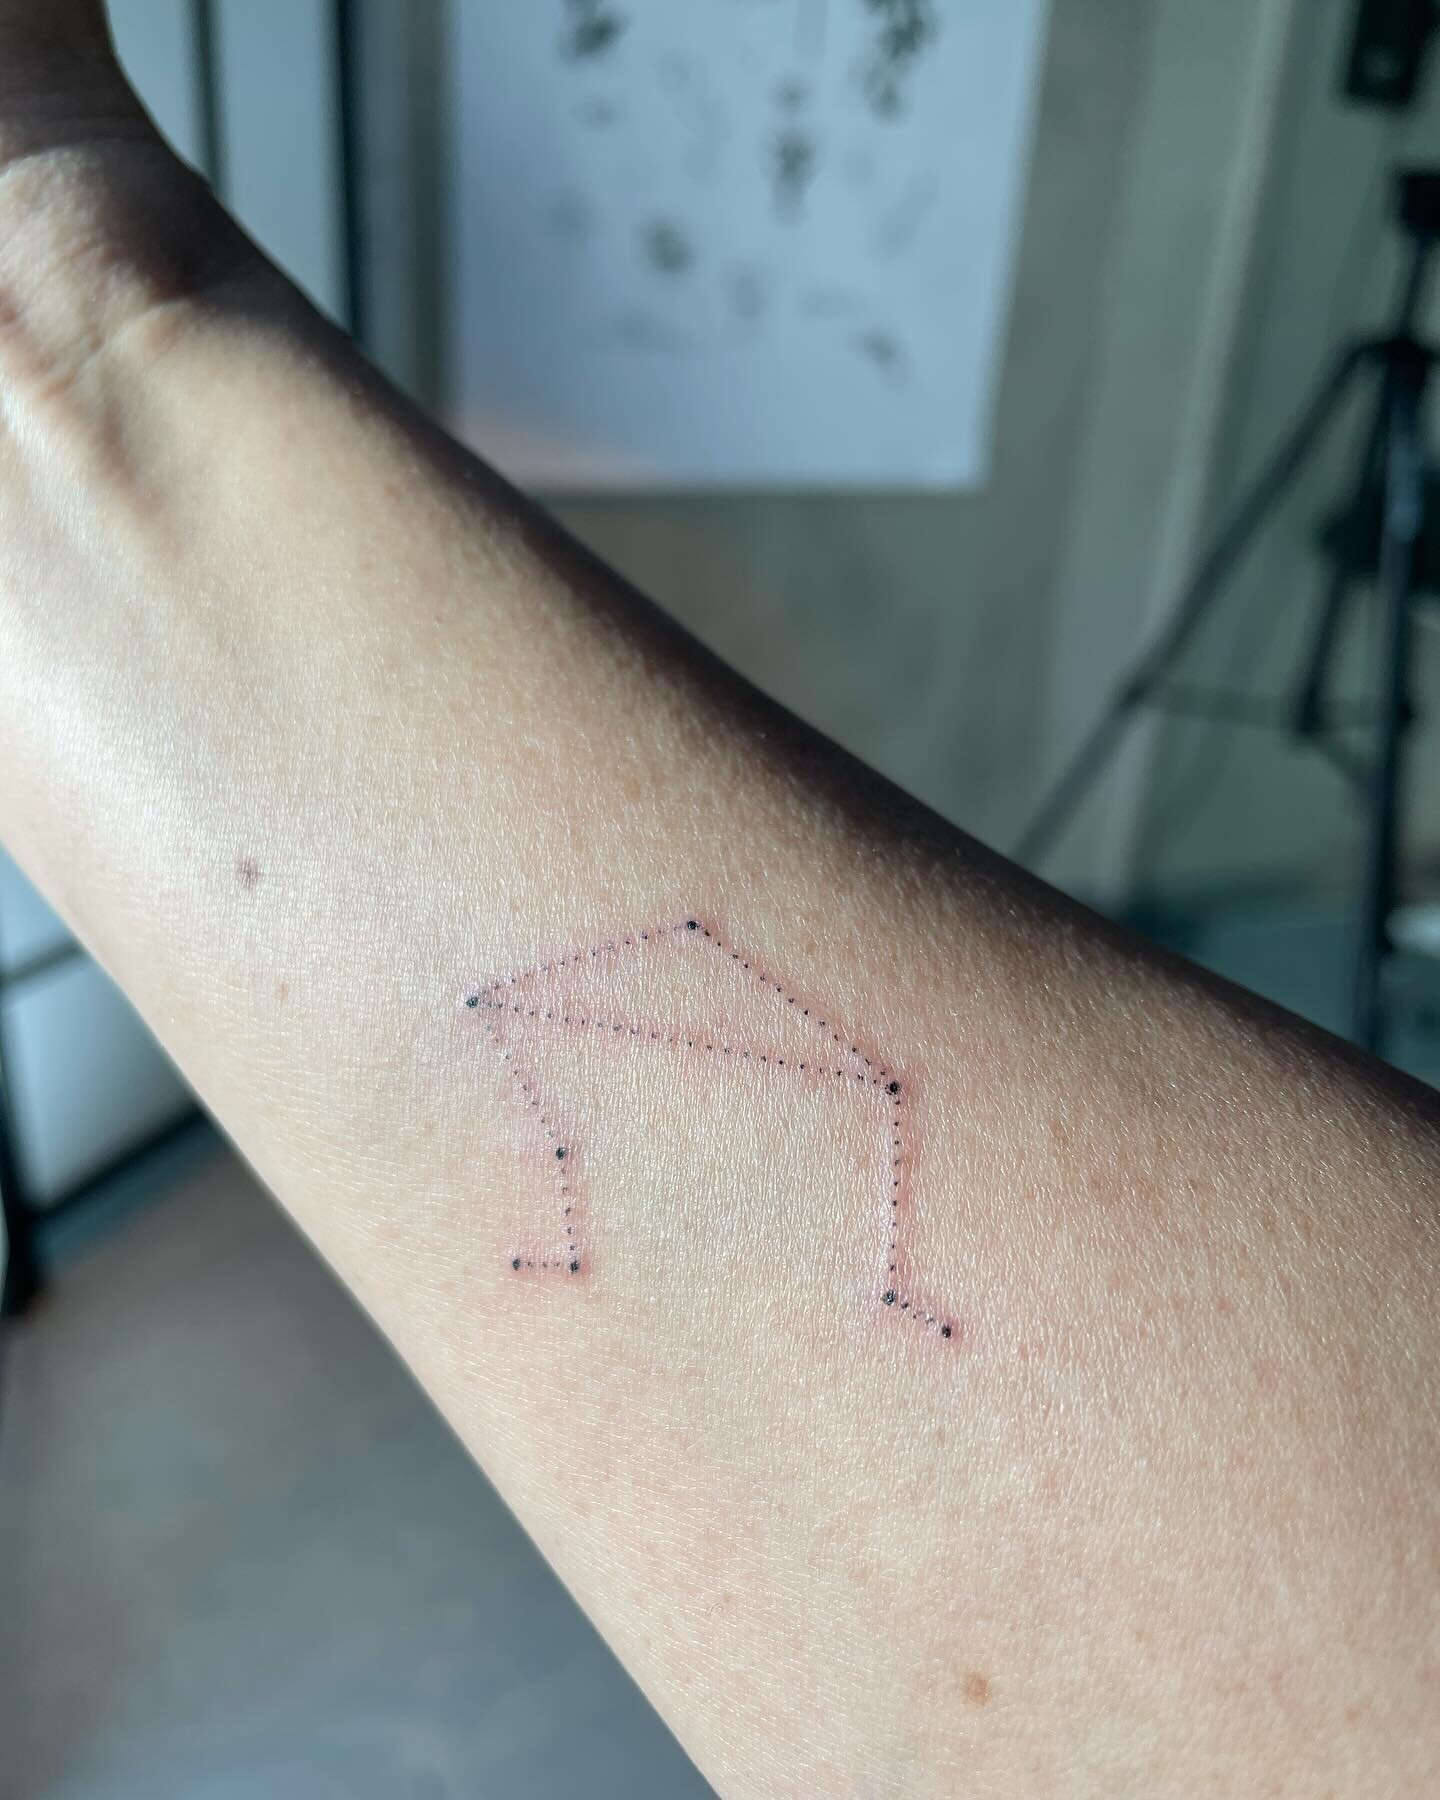 When in Berlin, get a #tattoo and a #piercing. Which I did with Cali at @calitattooart yesterday. 💜

I&rsquo;m all #libra so felt the Libra constellation on my right arm was necessary. 

As a Libra, I continually crave a lot of culture. I need art i